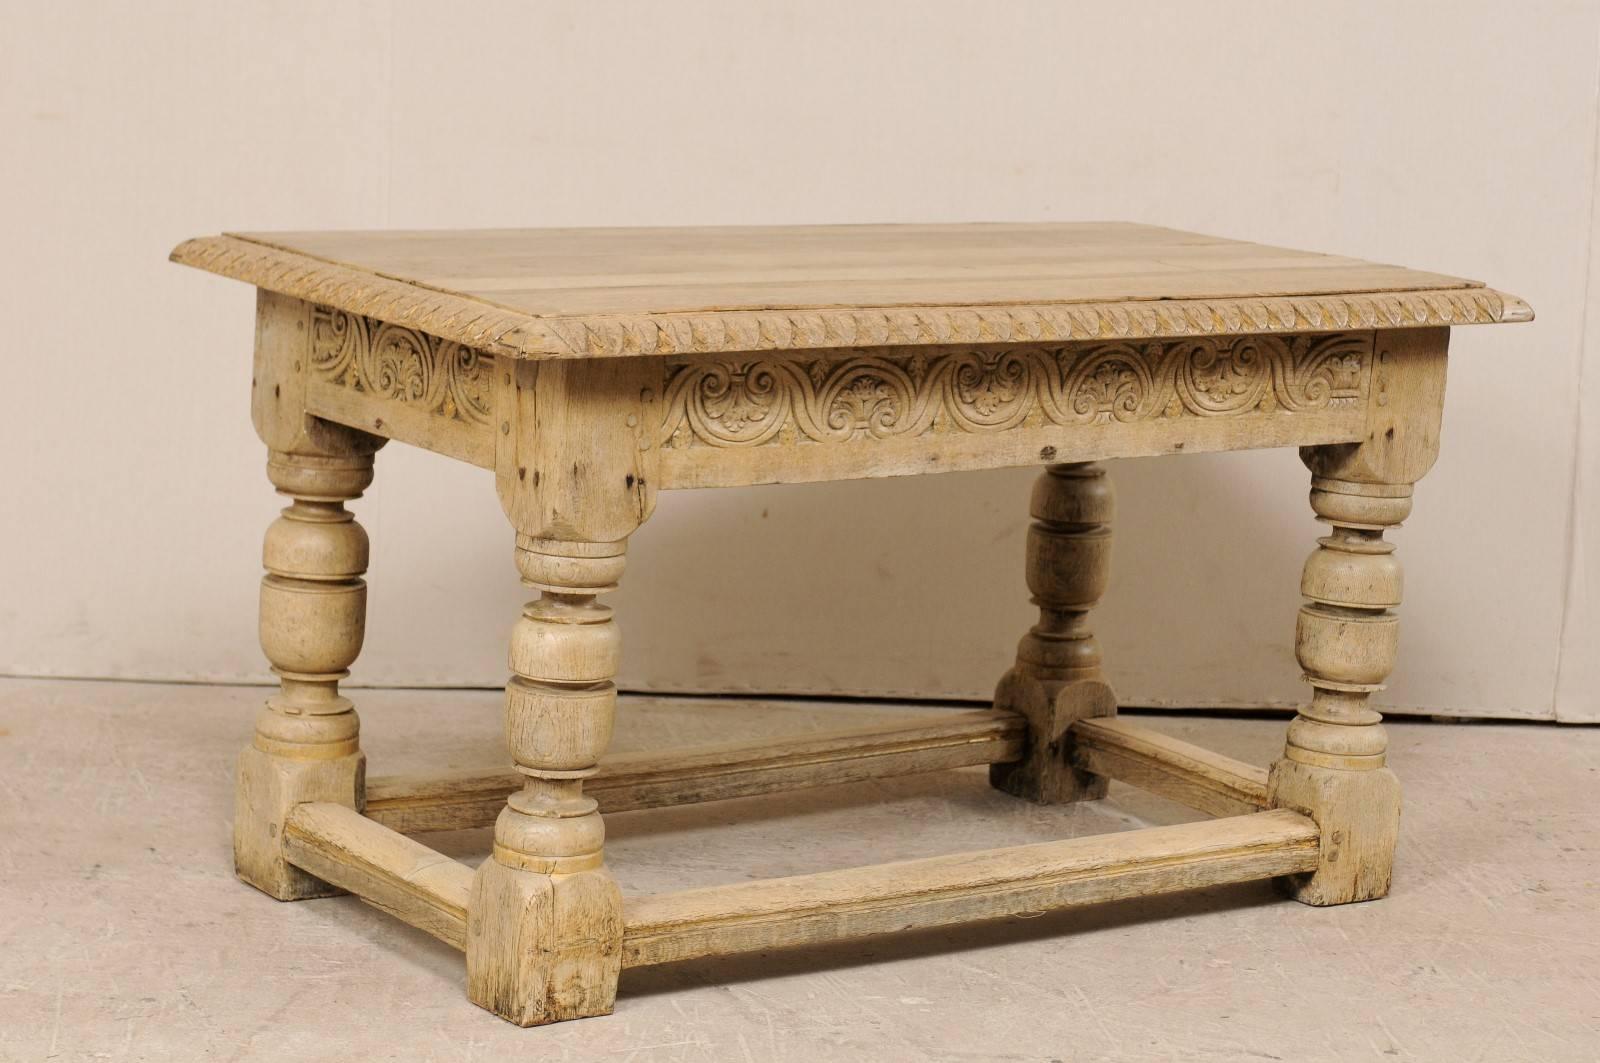 A French, 19th century table beautifully carved table with robust legs. This antique French table features a rectangular shaped top with exquisite leaf carvings and subtle gold accents around its edges. The skirt is intricately carved on all four